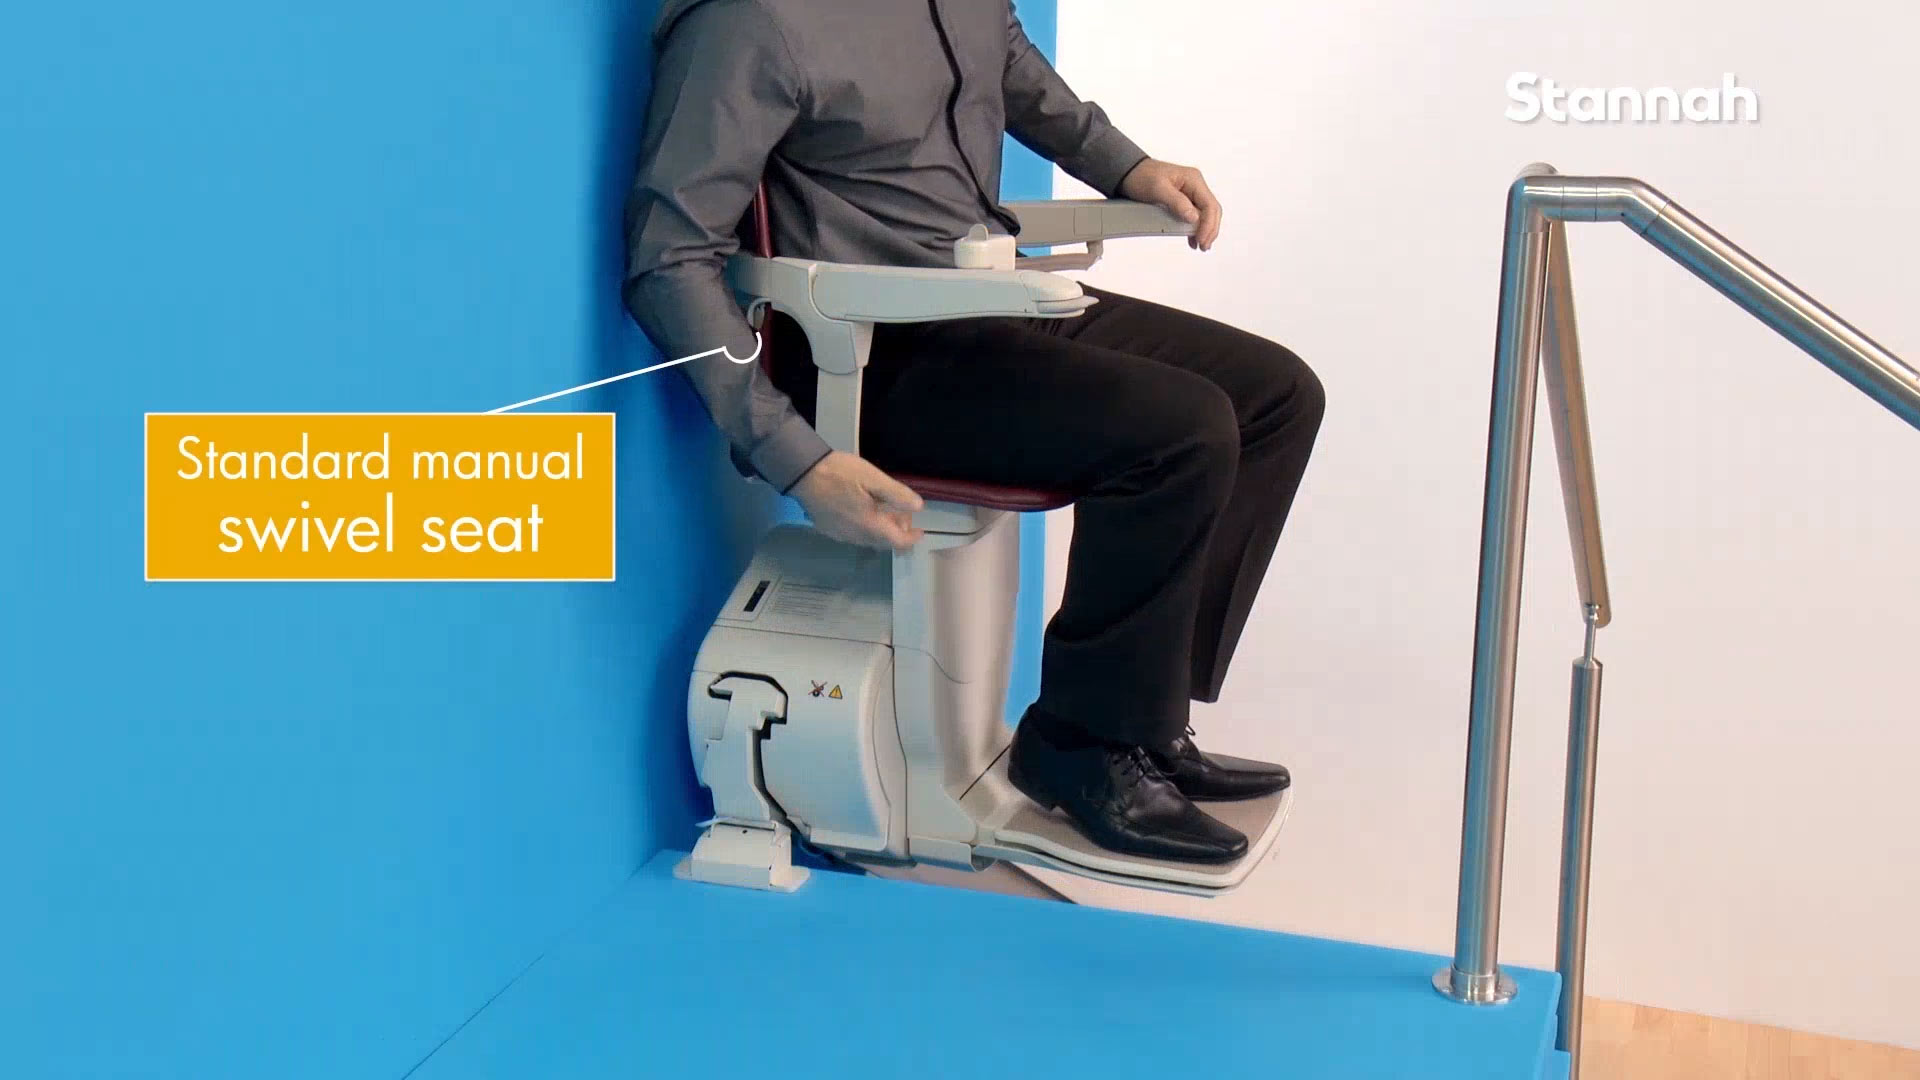 stairlift seat with standard manual swivel seat